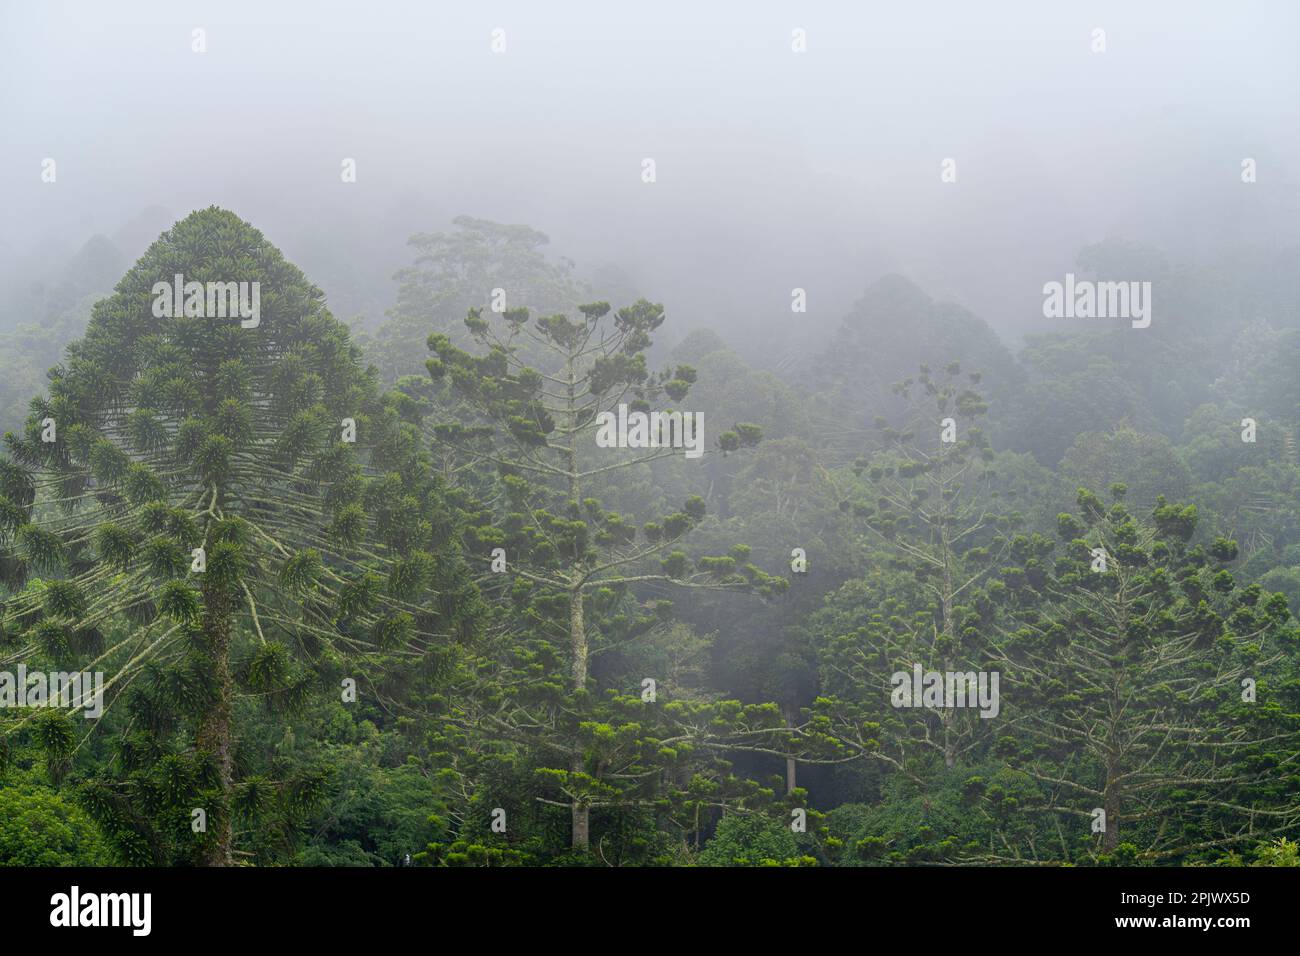 Bunya pines (Araucaria bidwillii) surrounded by mist at Bunya Mountains National Park, Queensland Australia Stock Photo